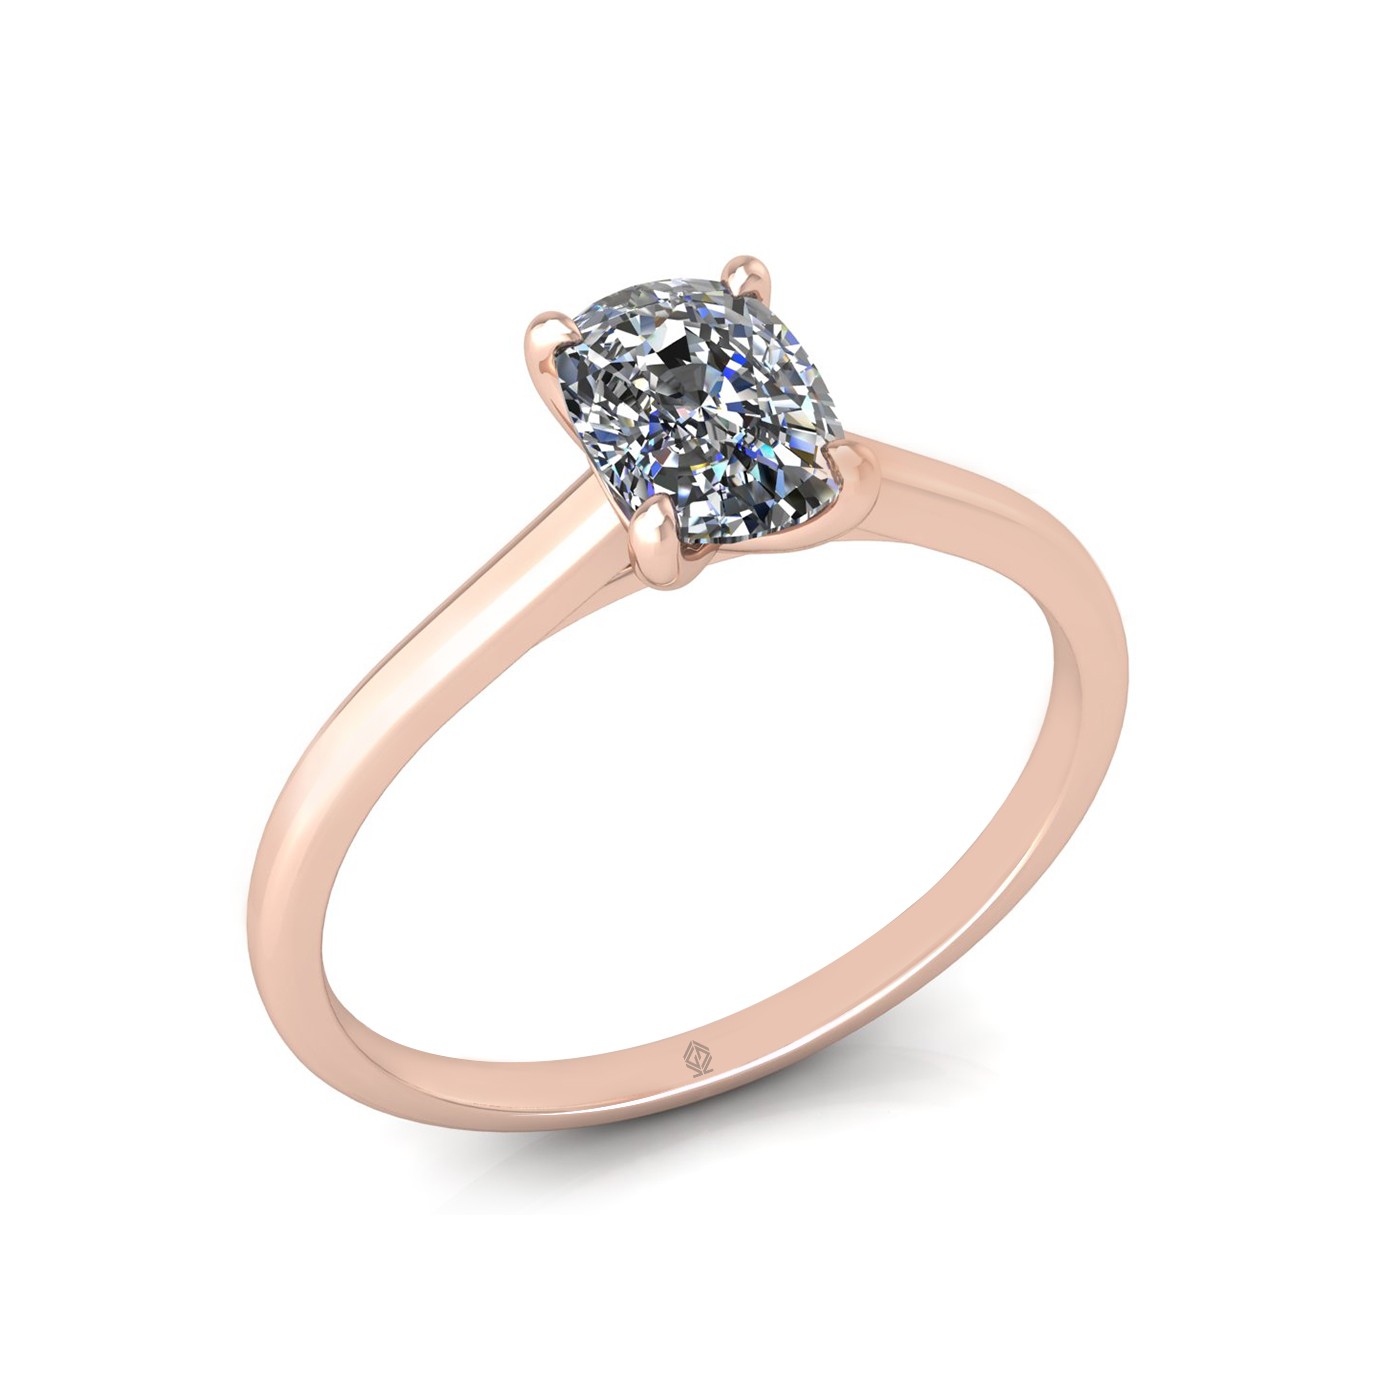 18k rose gold 1,00 ct 4 prongs solitaire elongated cushion cut diamond engagement ring with whisper thin band